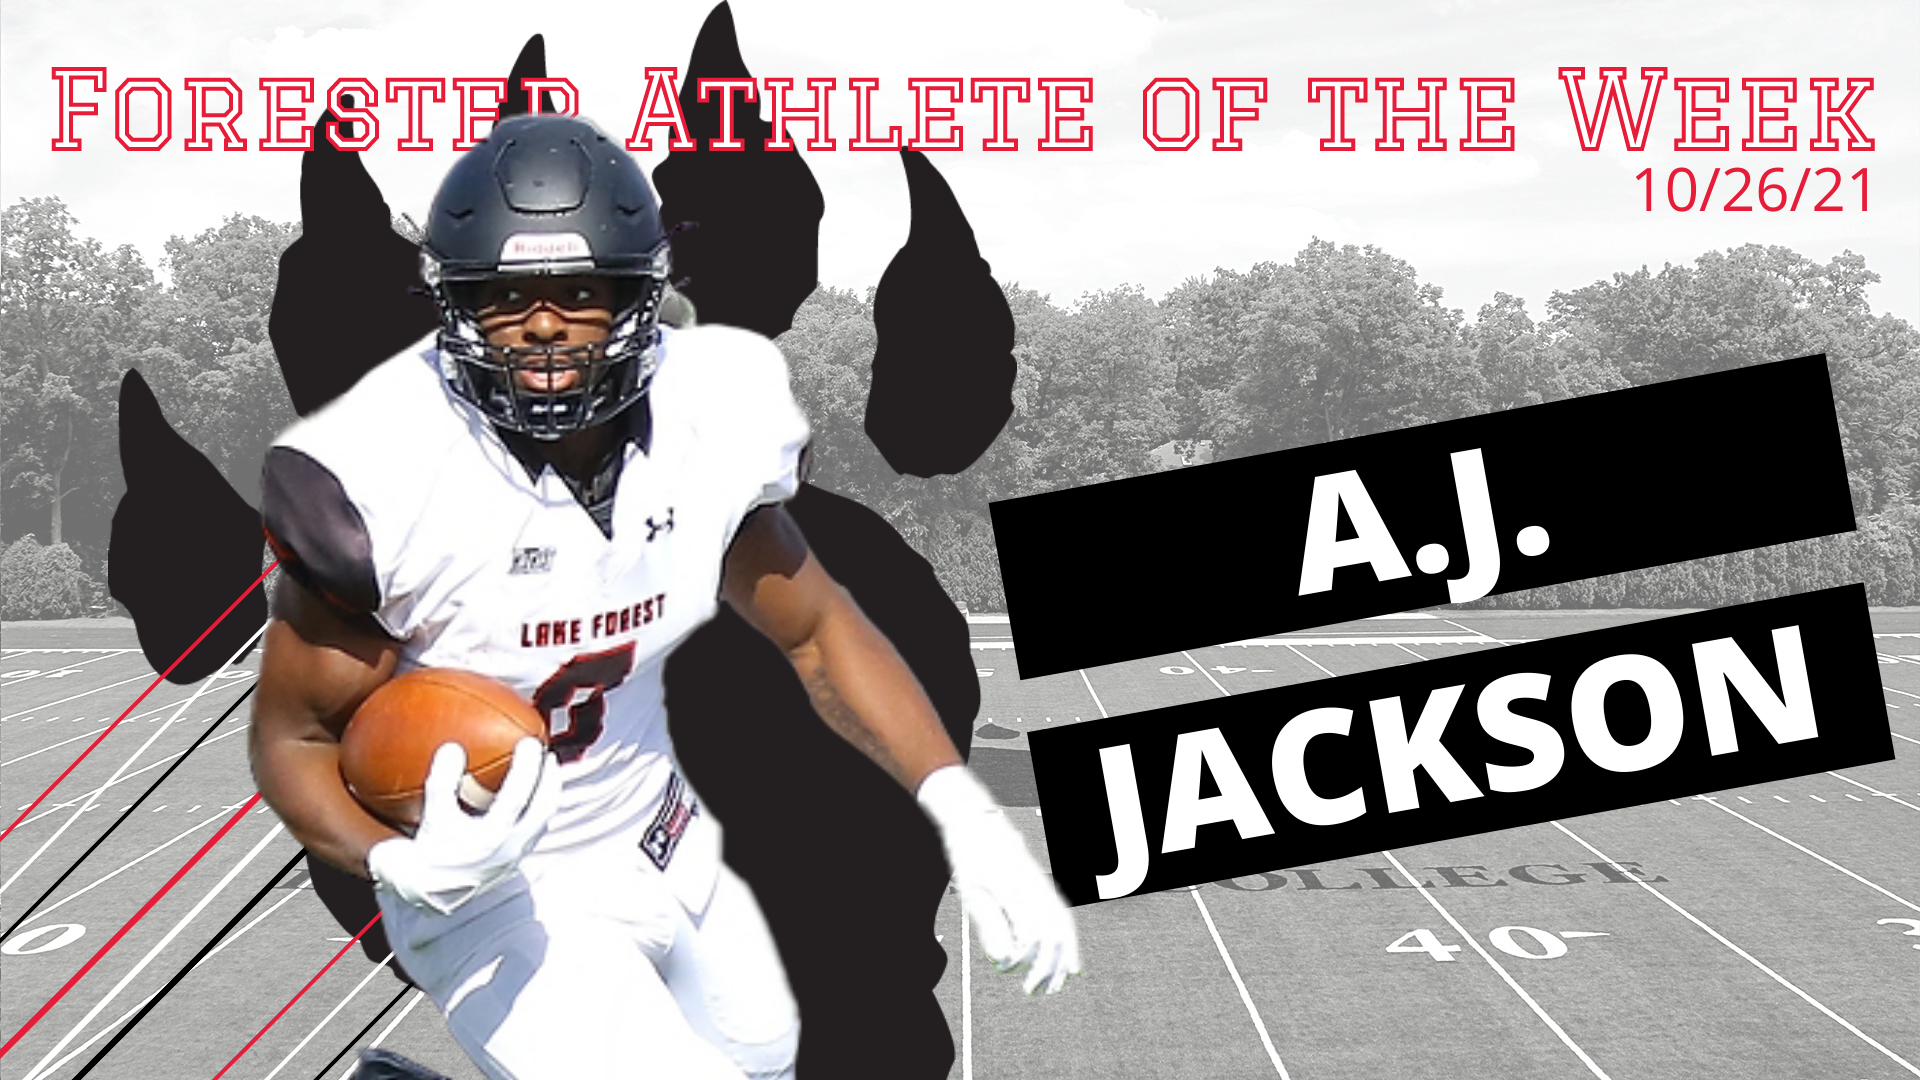 A.J. Jackson Named Men's Forester Athlete of the Week for Second Time